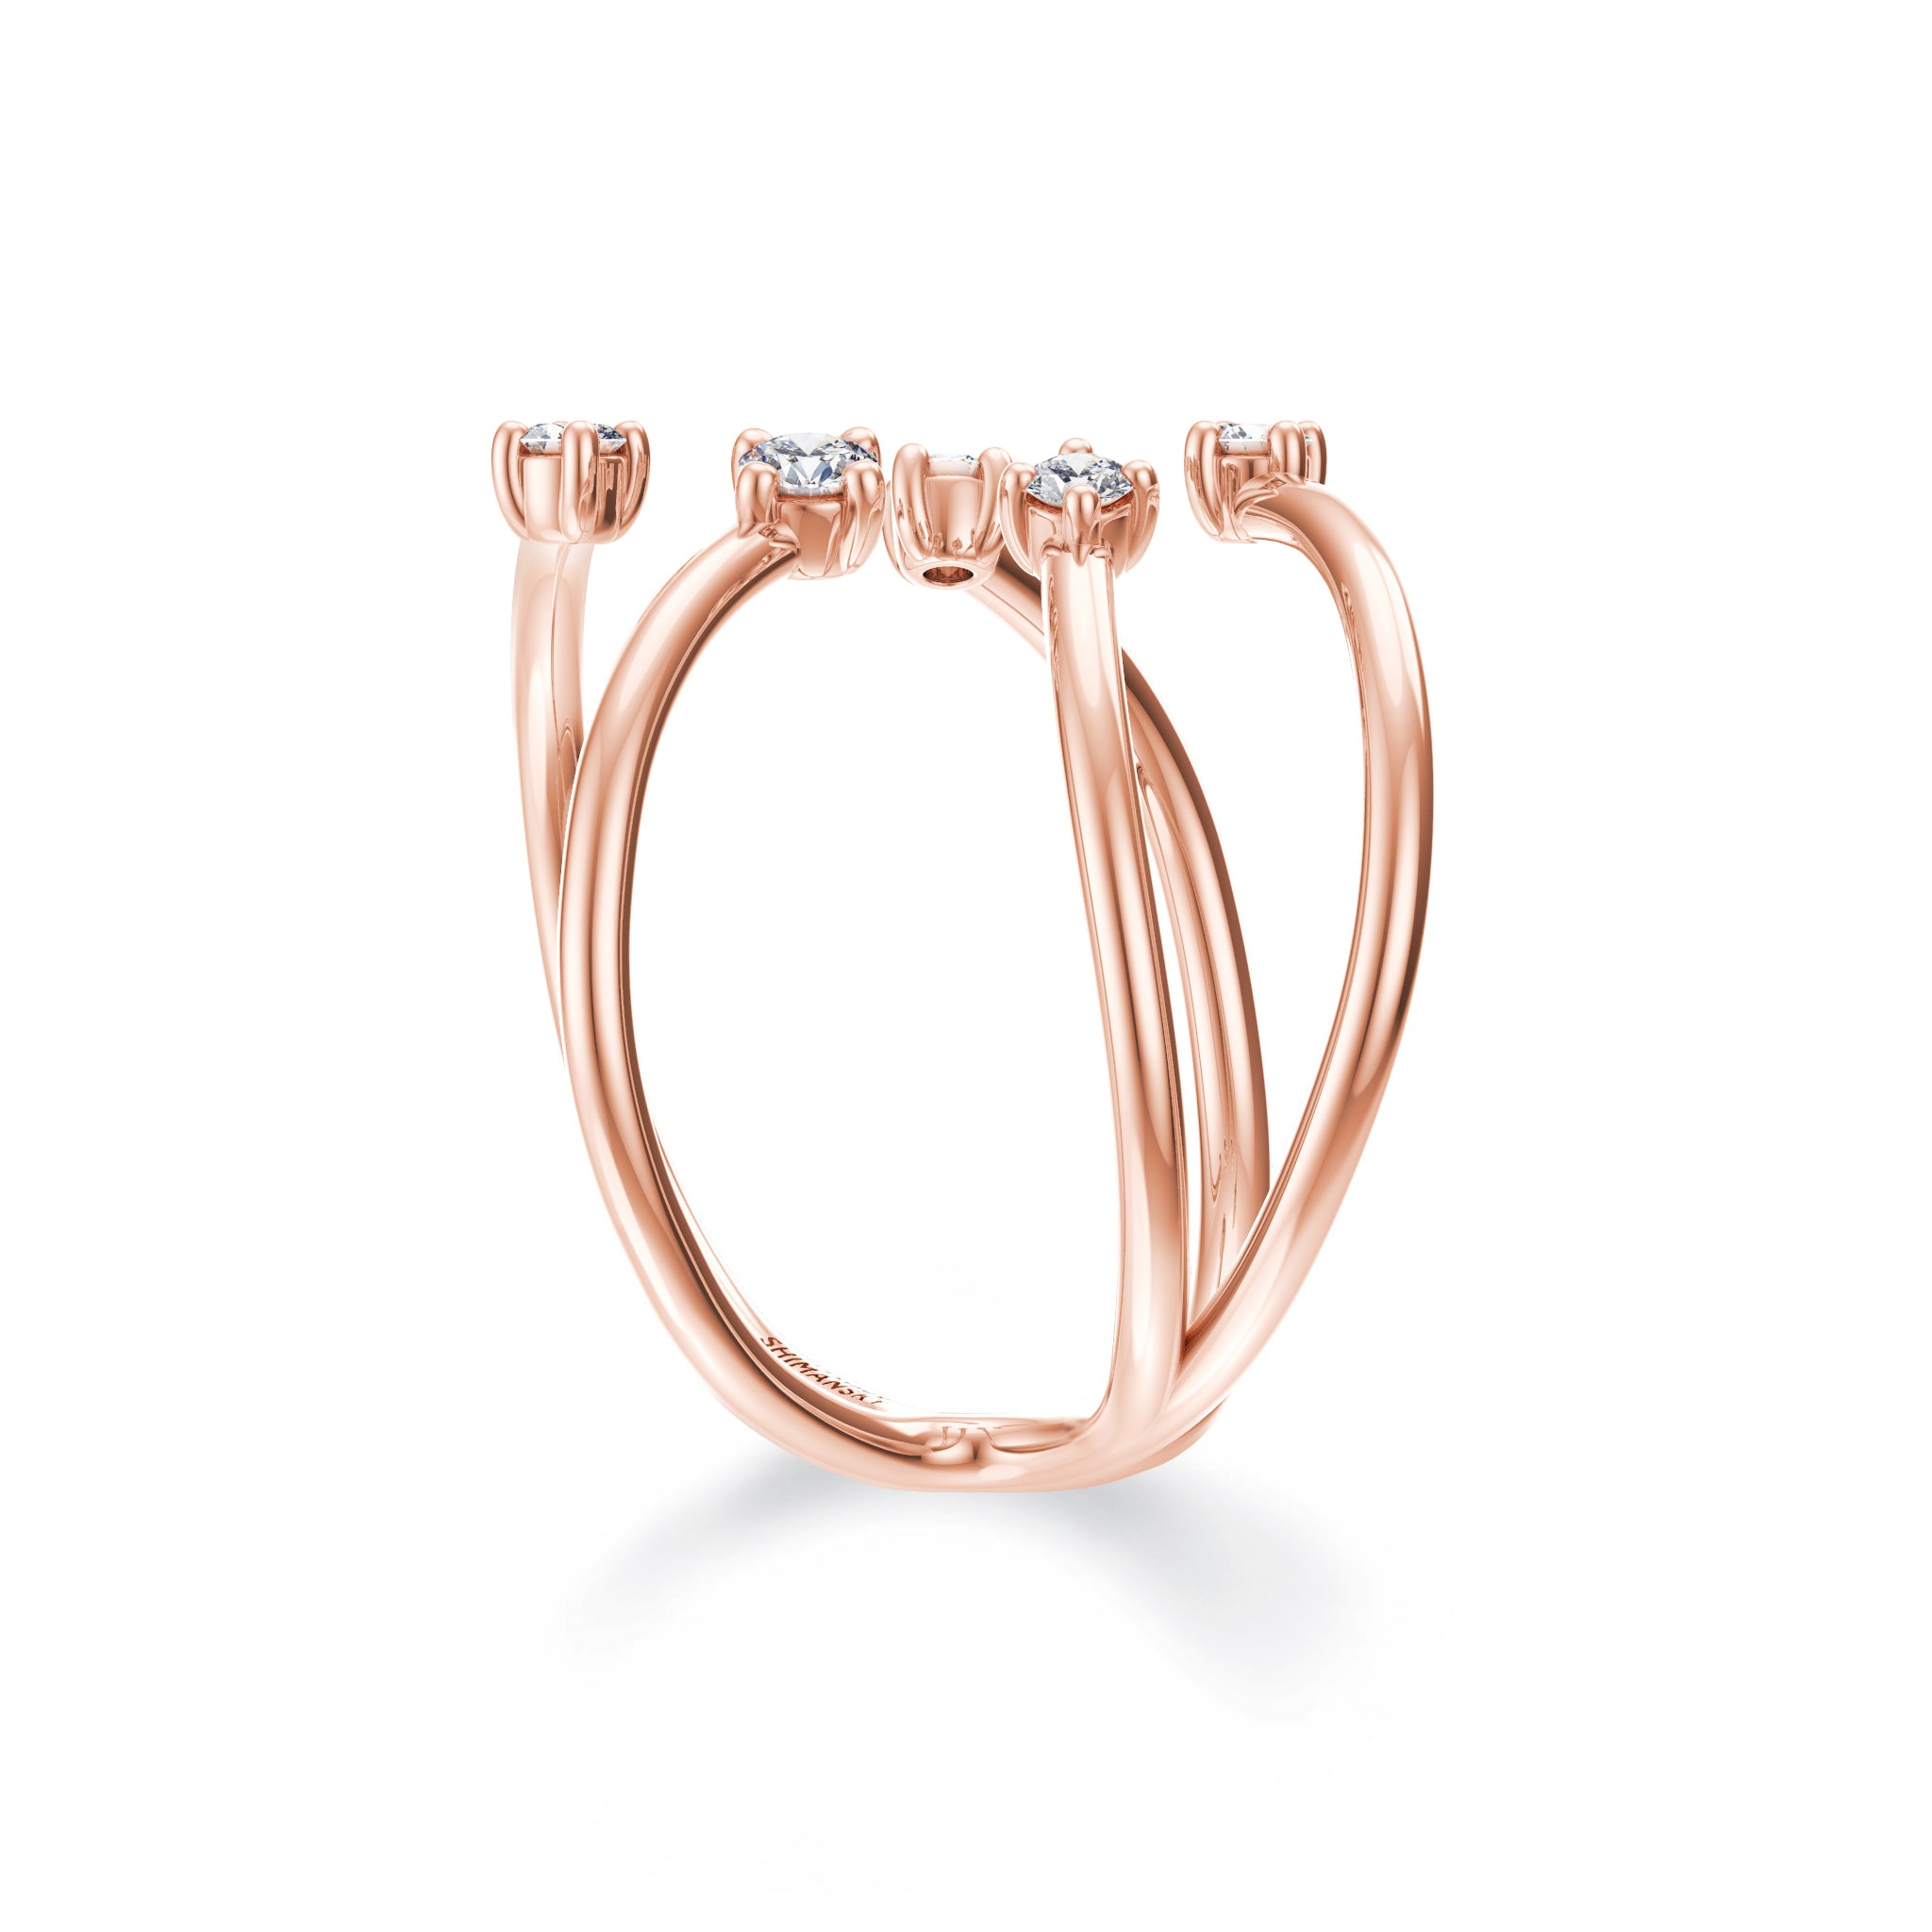 Shimansky - Southern Cross Large Diamond Ring Crafted in 14K Rose Gold